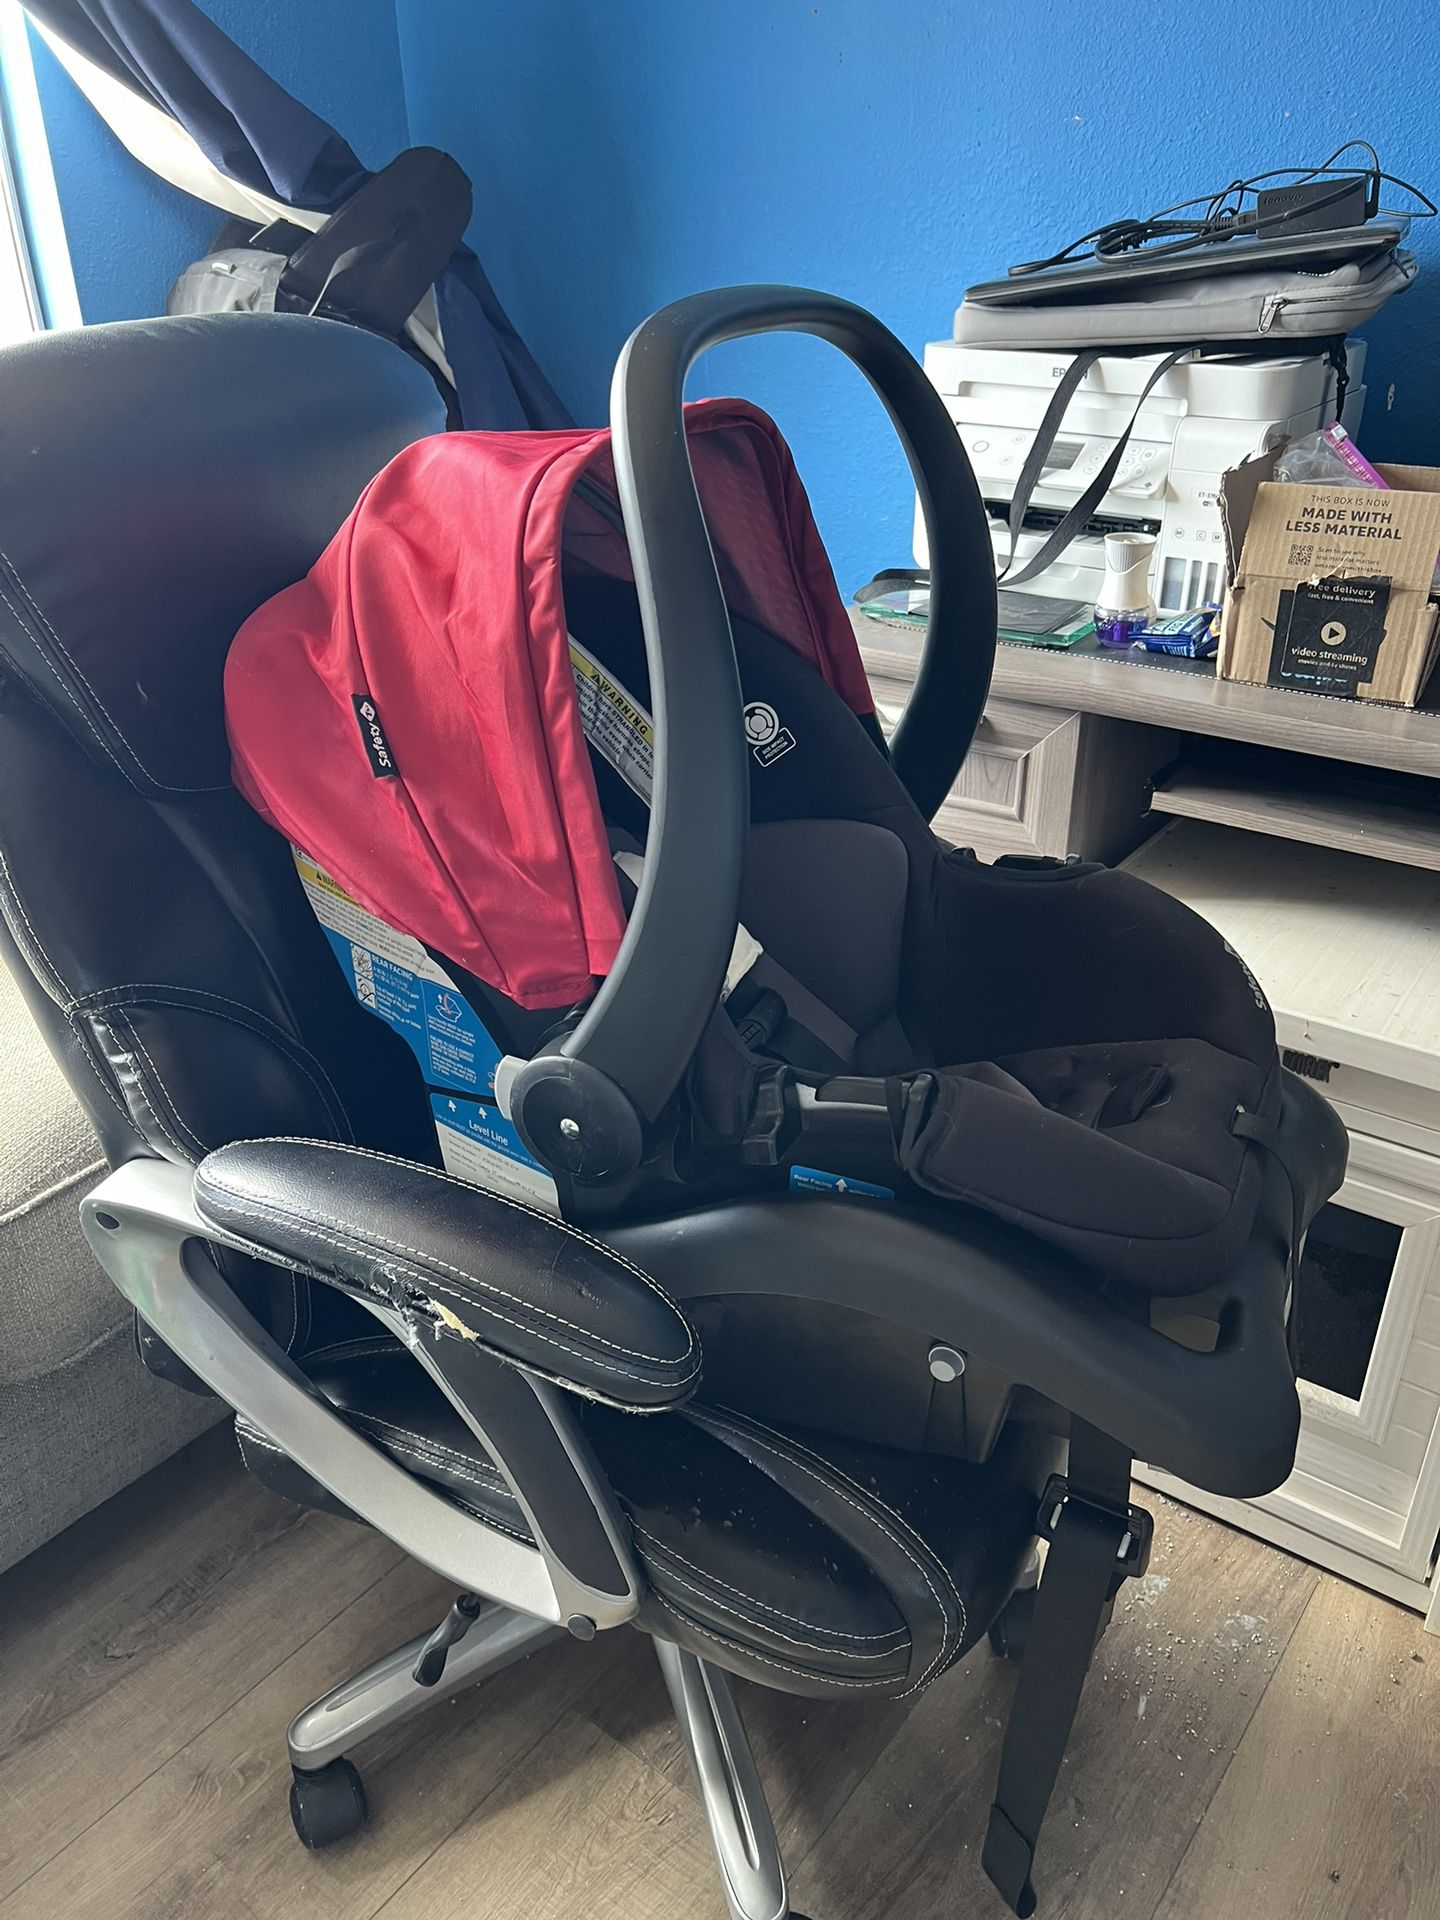 Safety First Infant Car Seat